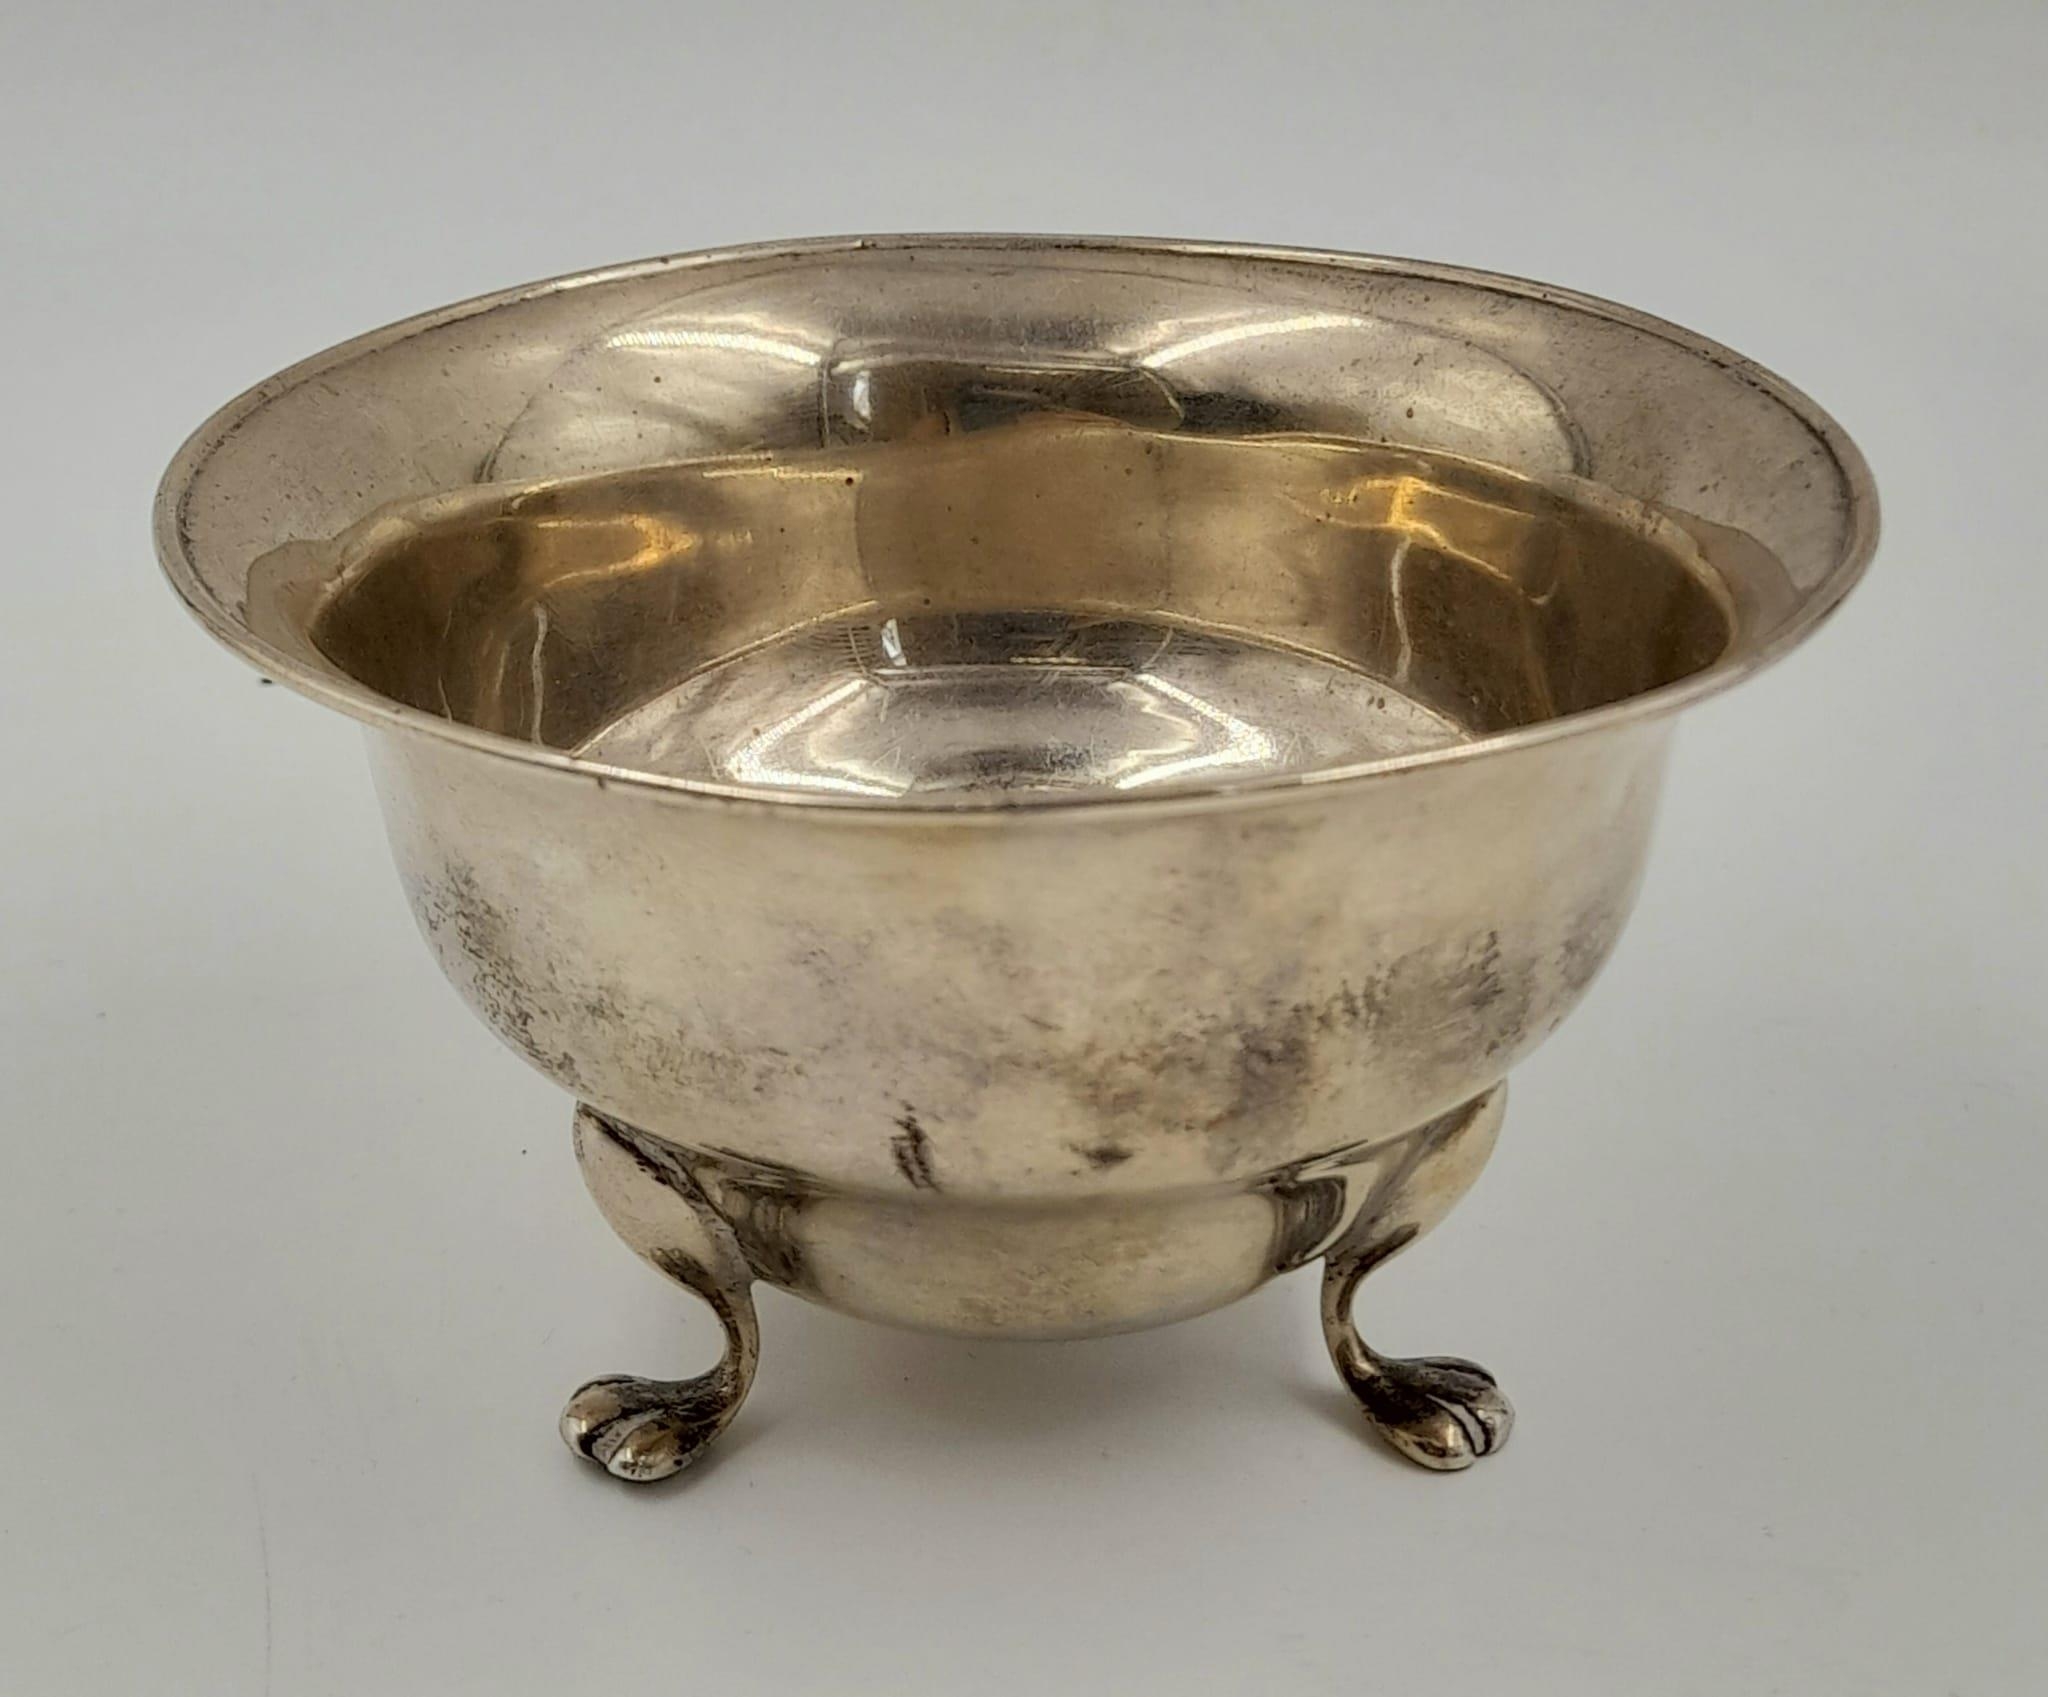 An Antique Solid Silver Bowl with Three Pedestal Lion Feet. Hallmarks for London 1908. 10.5 x 6.5cm. - Image 3 of 17